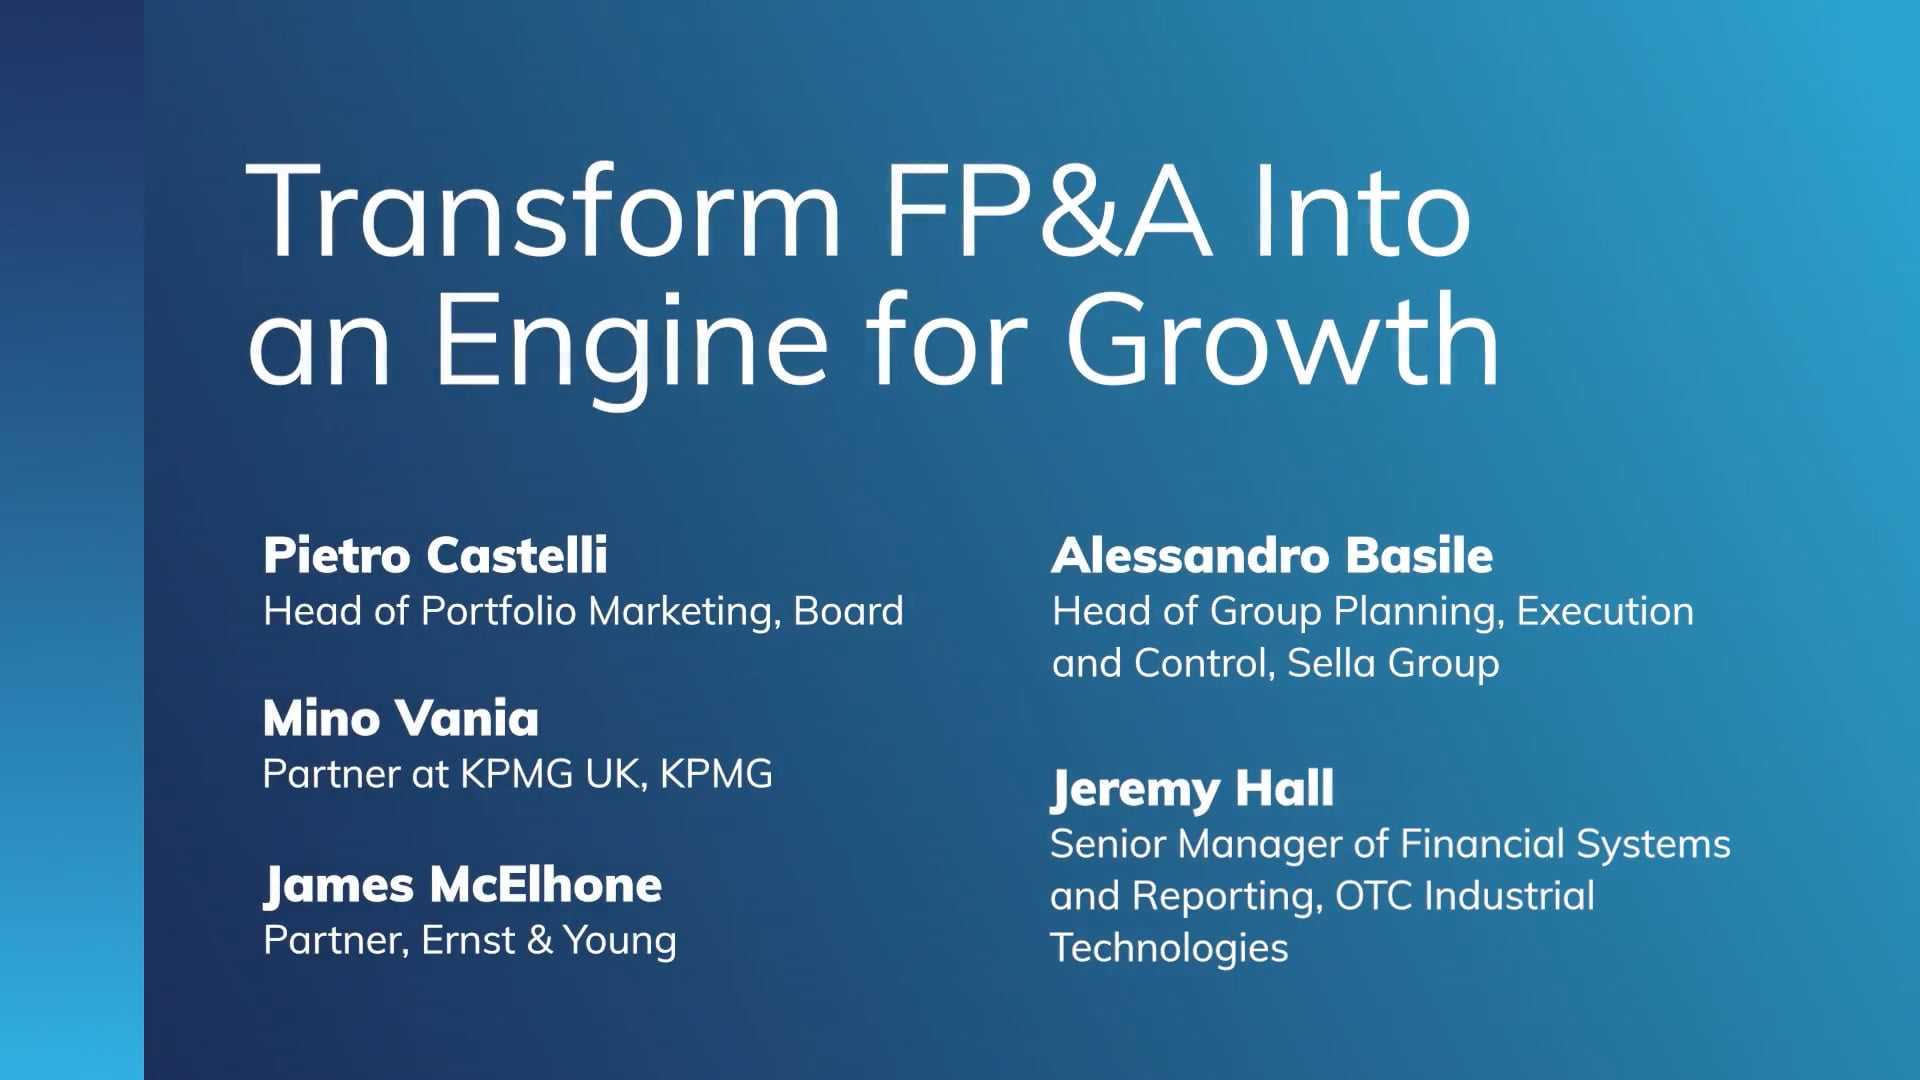 Transform FP&A into an Engine for Growth